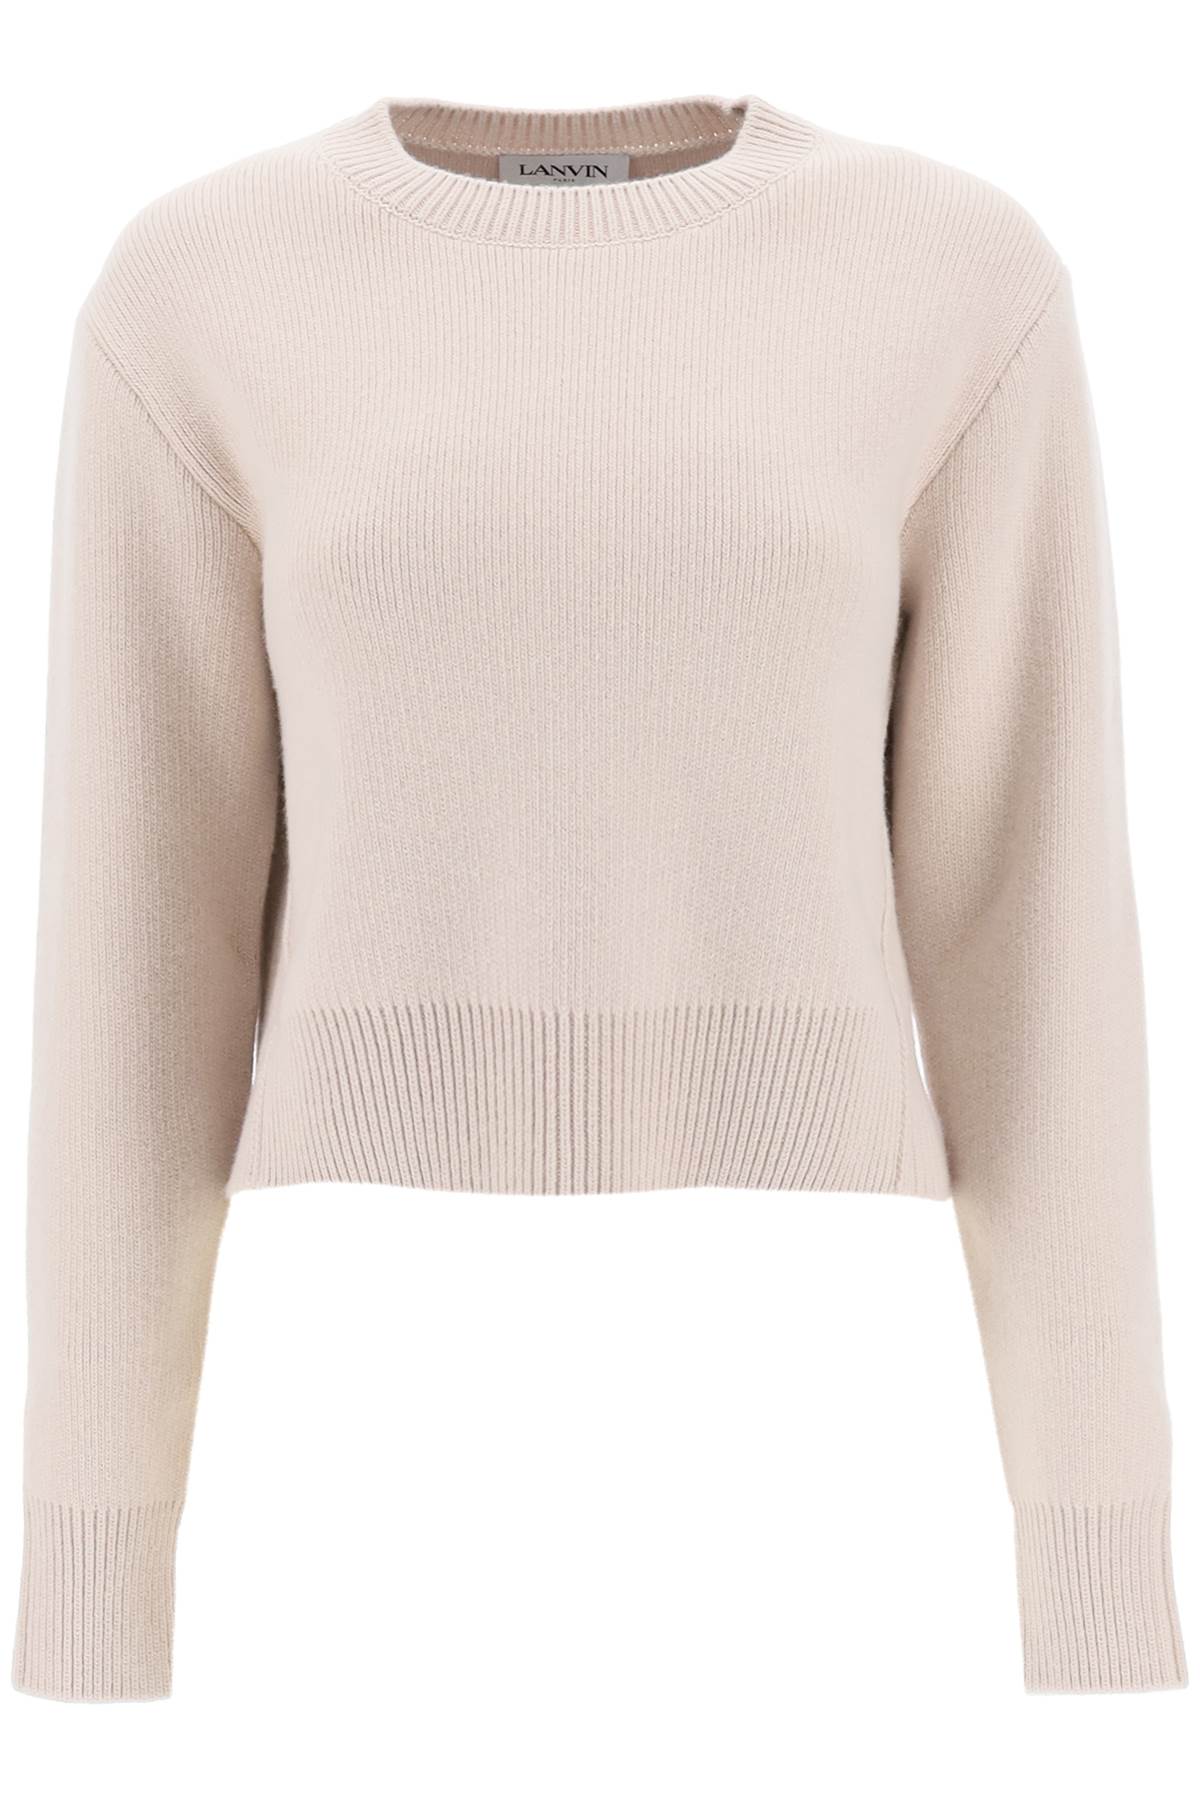 Lanvin cropped wool and cashmere sweater-0